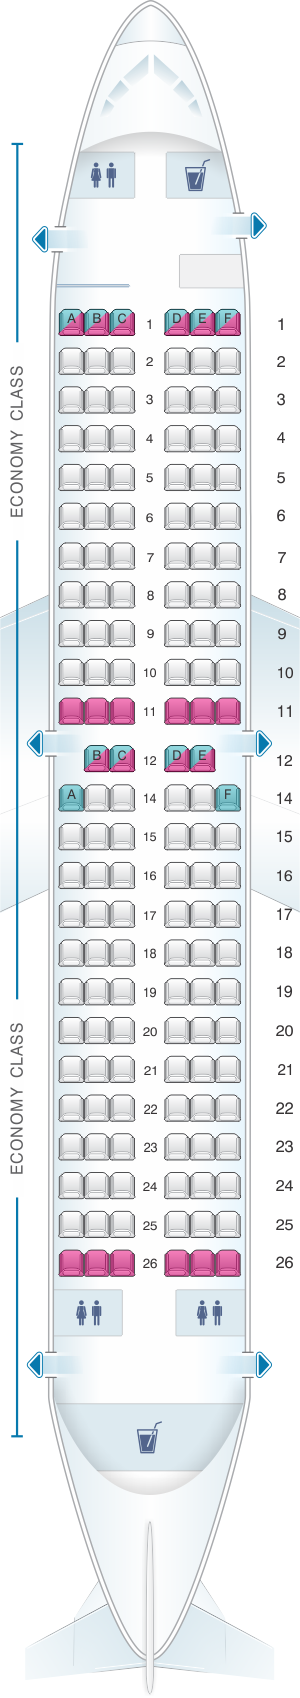 Seat map for Blue Panorama Boeing B737 300